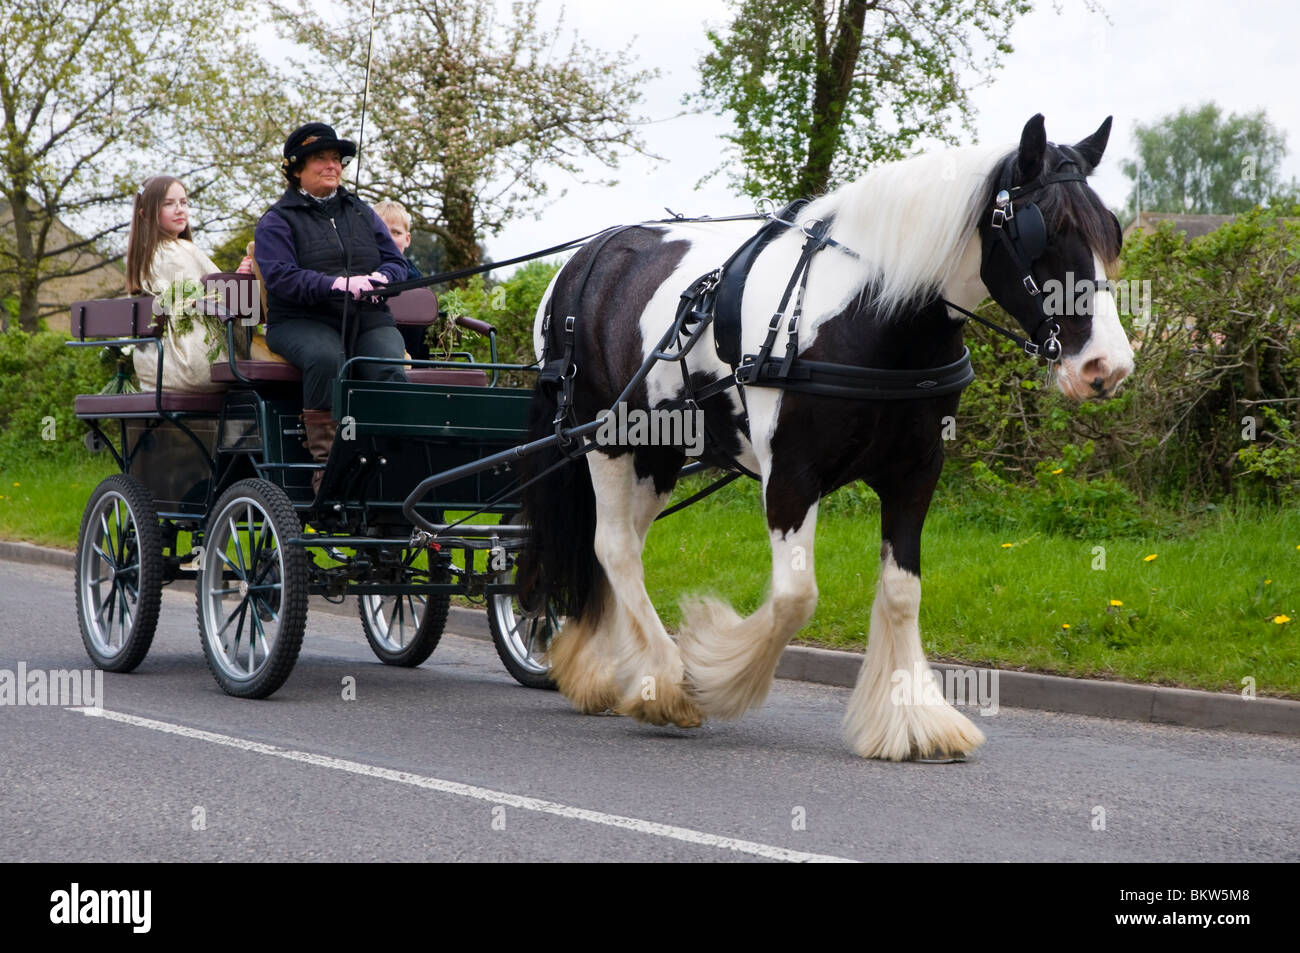 A pony and trap used to take the May Queen to her coronation in a cotswold village on Mayday. Stock Photo